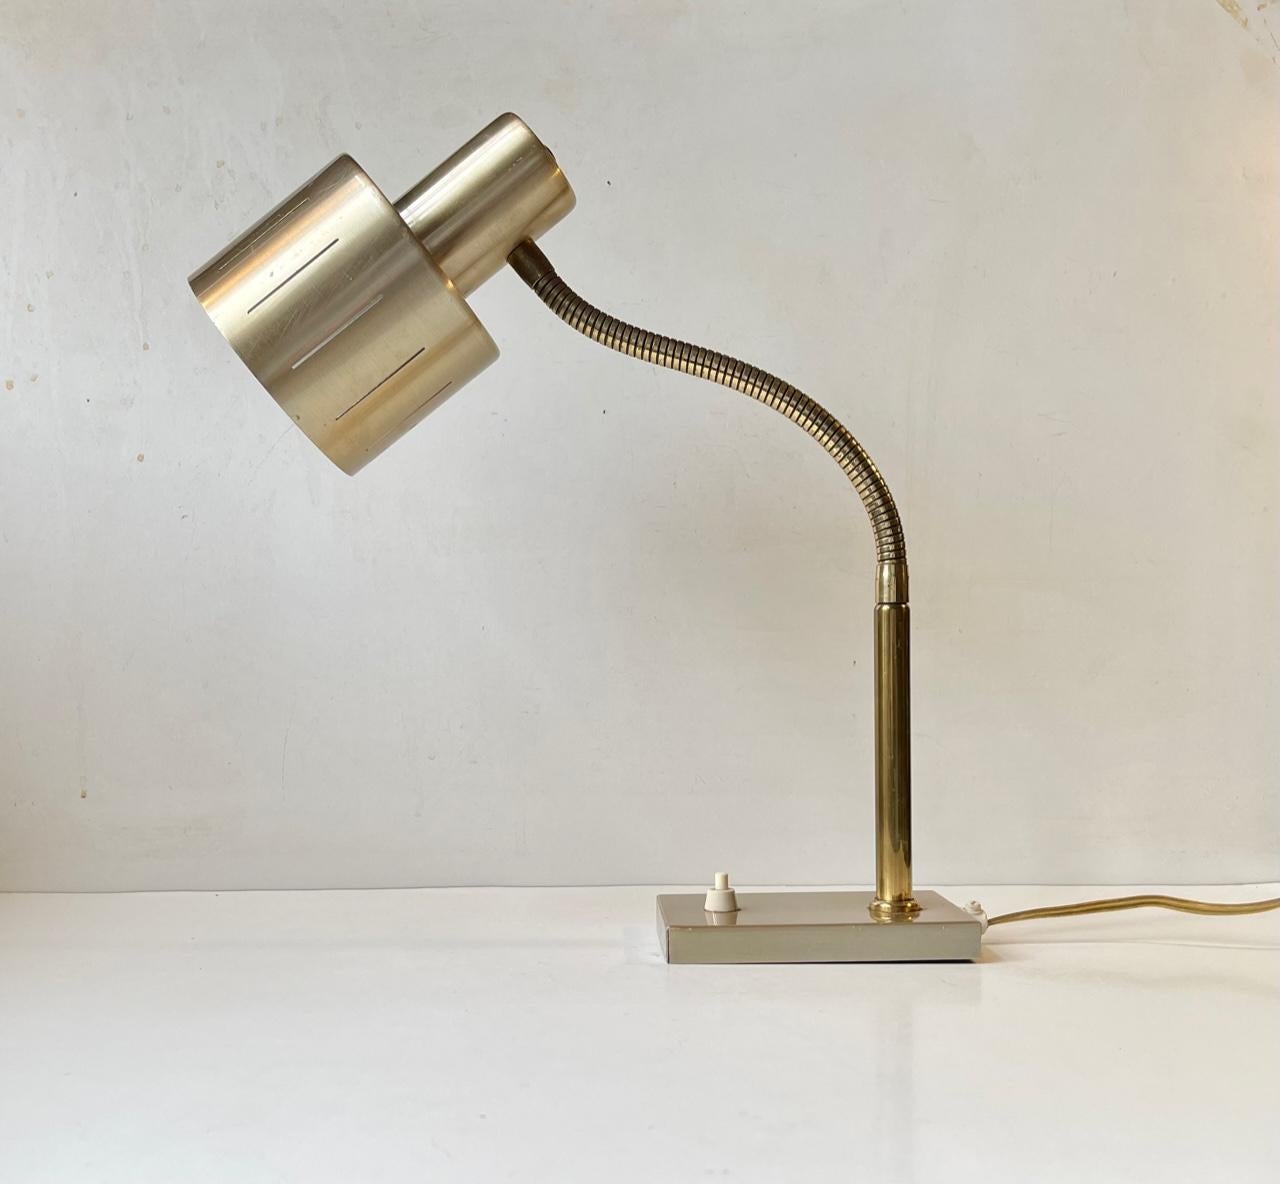 Versatile table lamp from the Danish design-trio Vitrika. Manufactured in the early 1970s in a style reminiscent of Jo Hammerborg for Fog & Mørup. Its made from brass and brass-alloy aluminium. It features flexible swan-neck, shade-perforations and